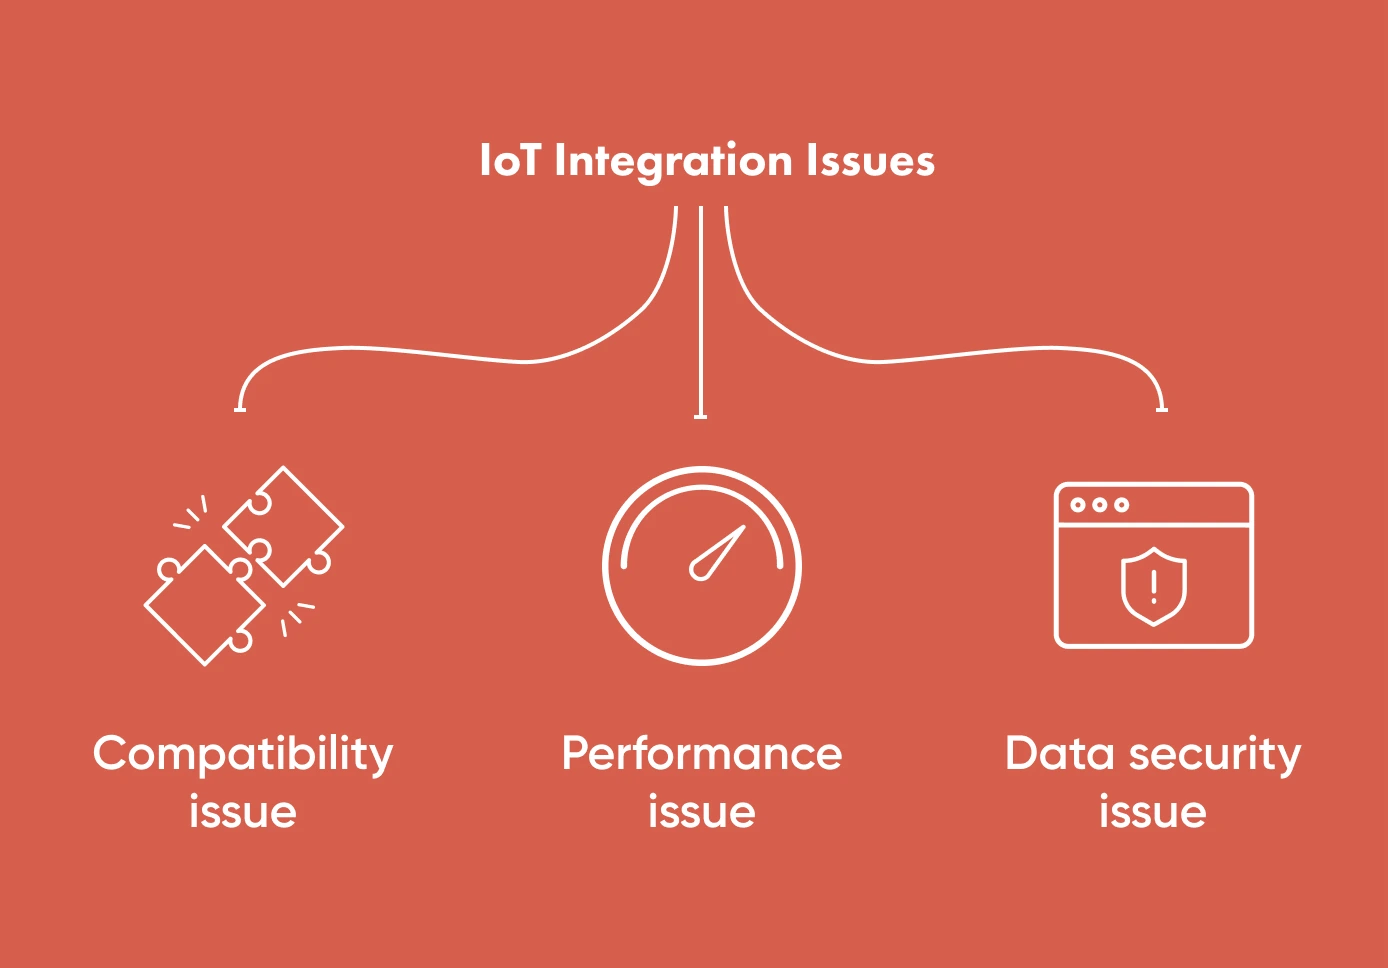 Along with the benefits come some of the issues associated with IoT integration.